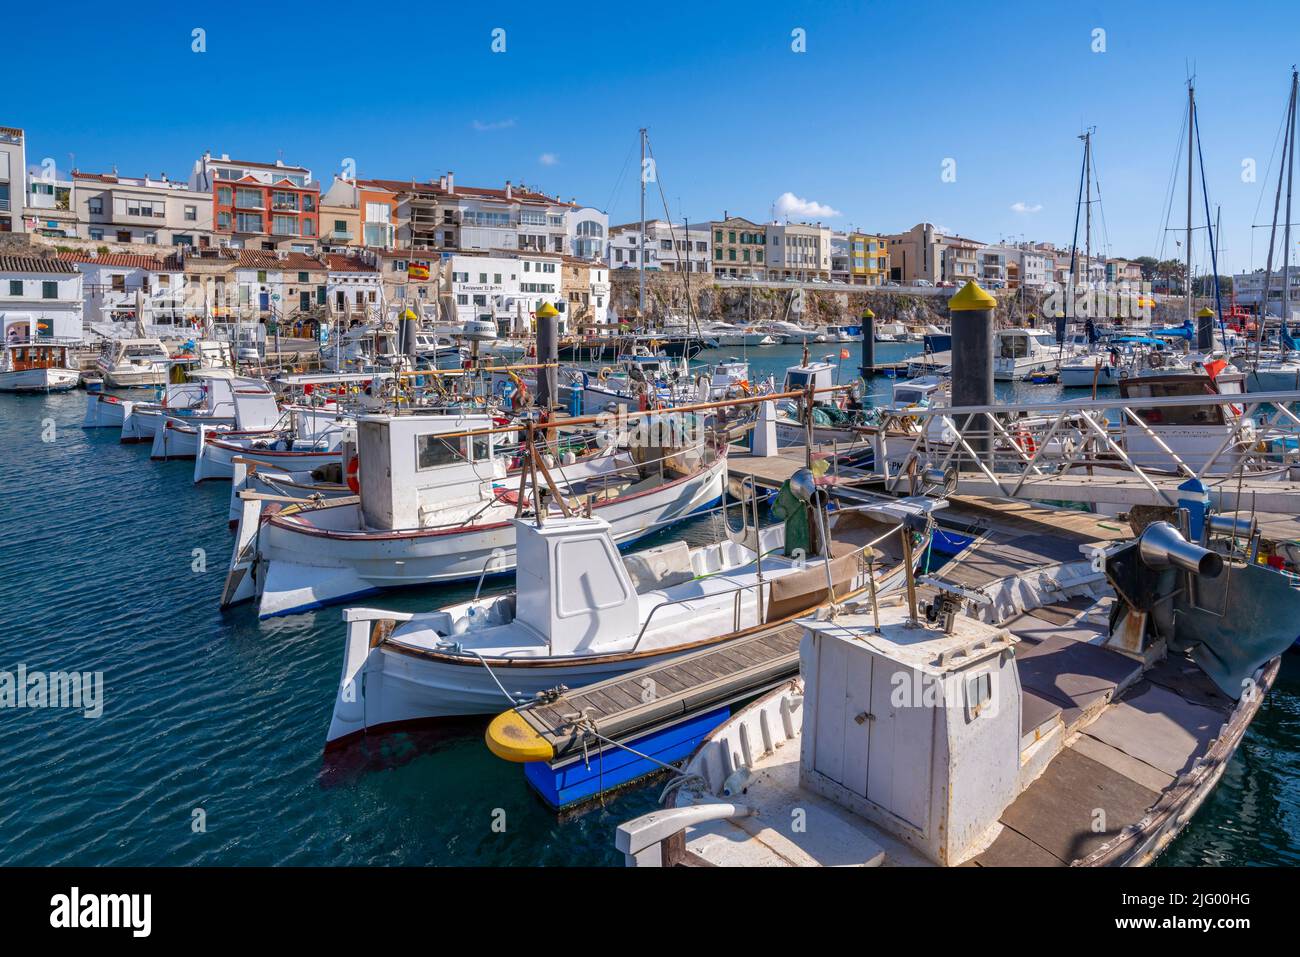 View of boats in marina overlooked by whitewashed houses, Ciutadella, Menorca, Balearic Islands, Spain, Mediterranean, Europe Stock Photo